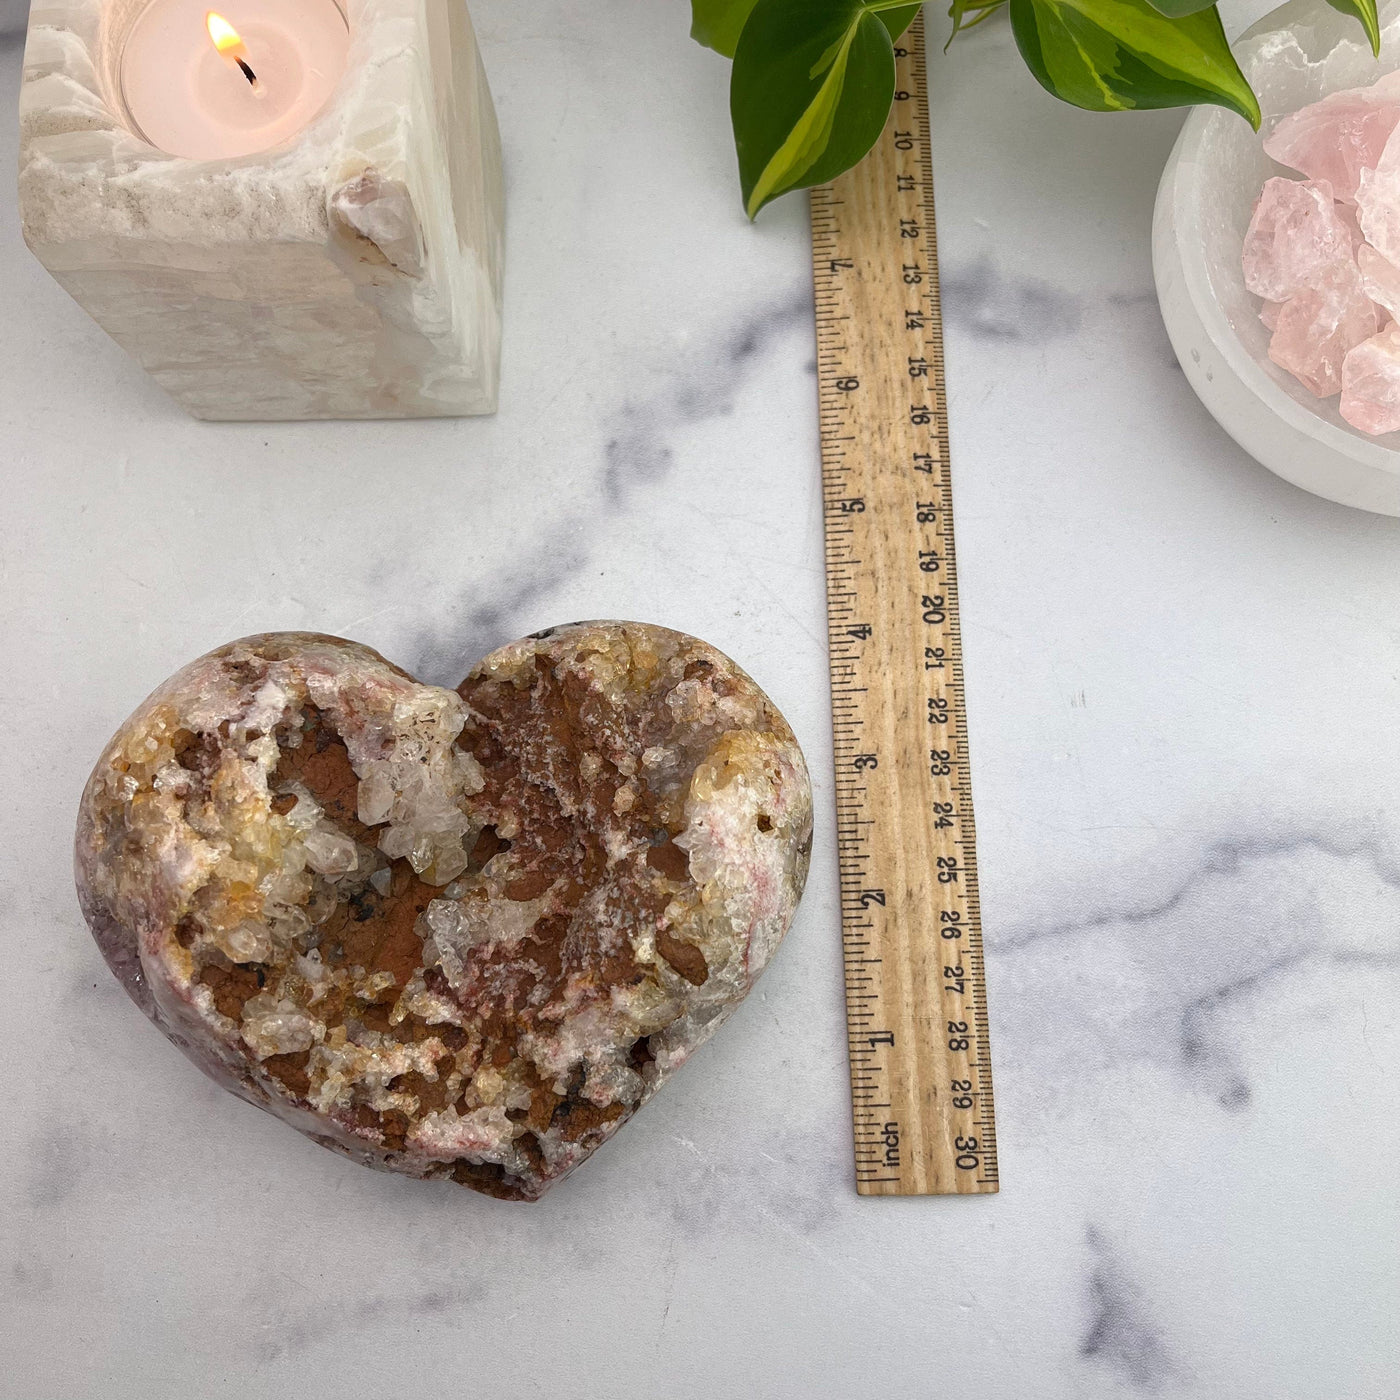 Pink Amethyst Crystal Heart With Ruler For Size Reference 